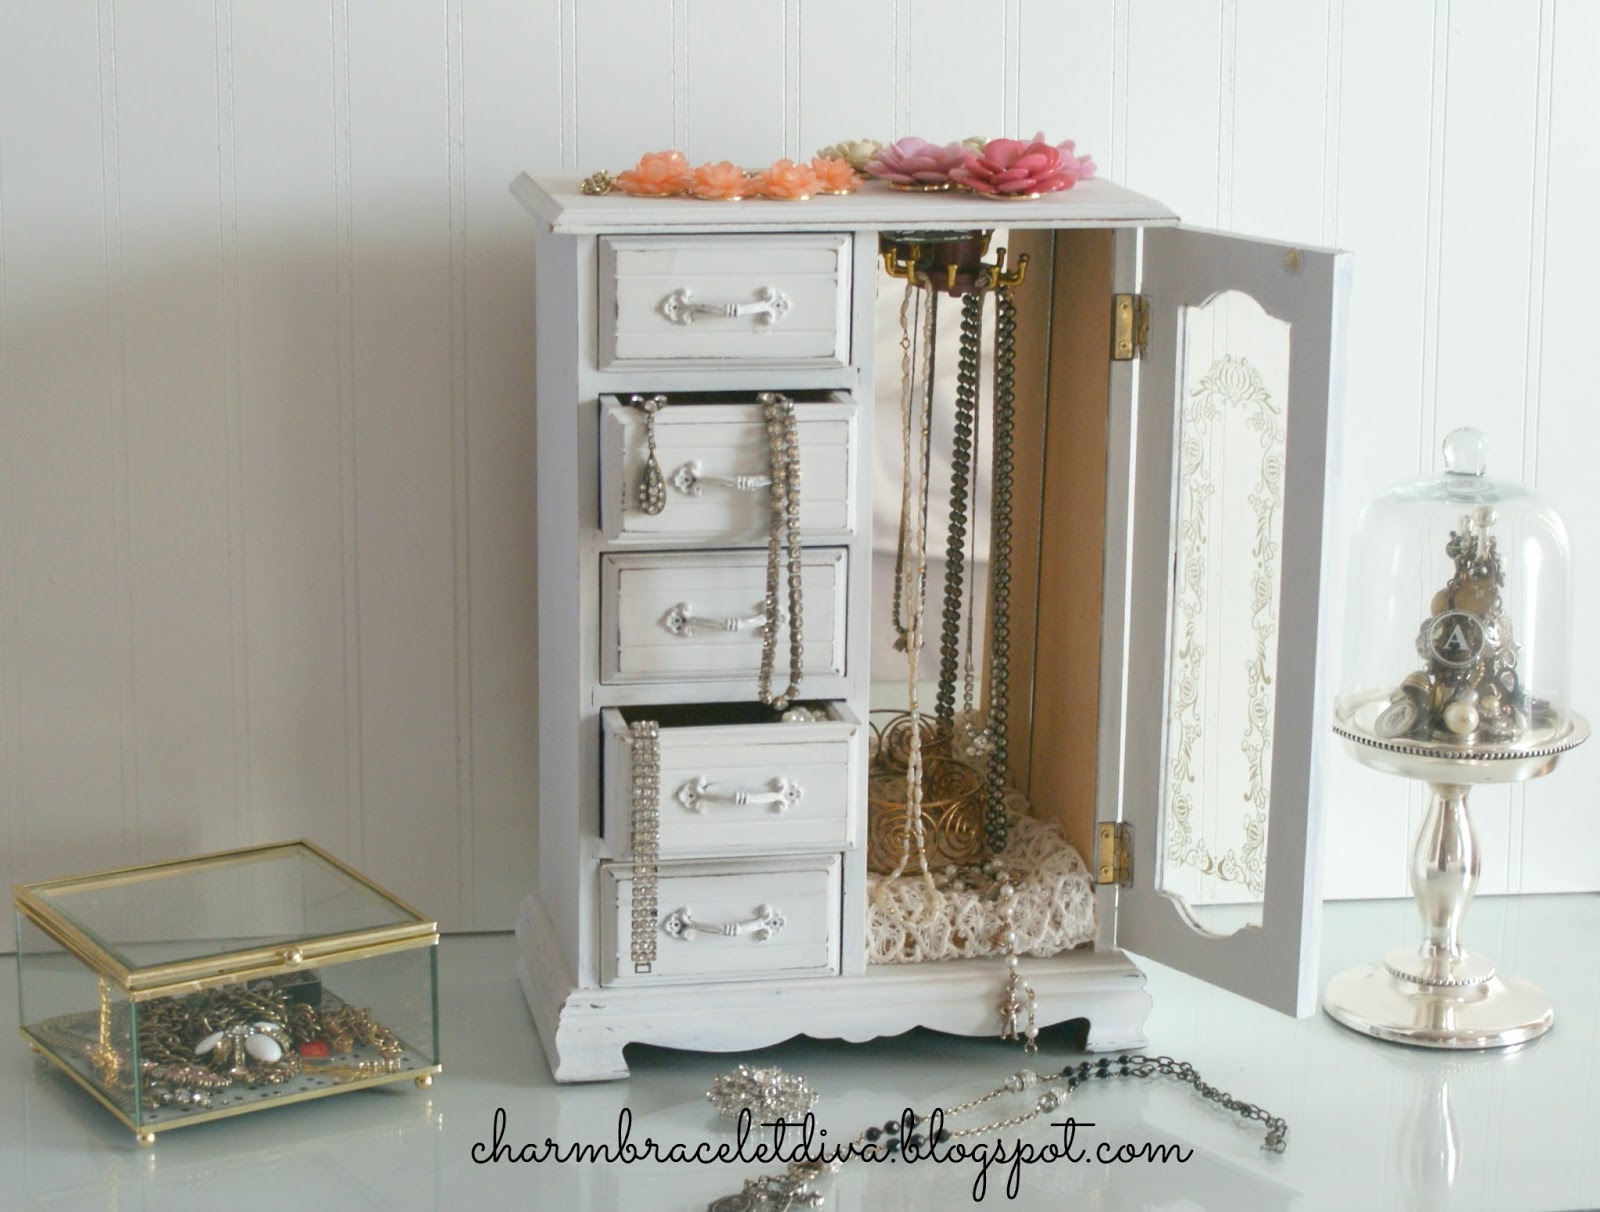 Dixie Belle Paint Company - A jewelry box dripping with beautiful